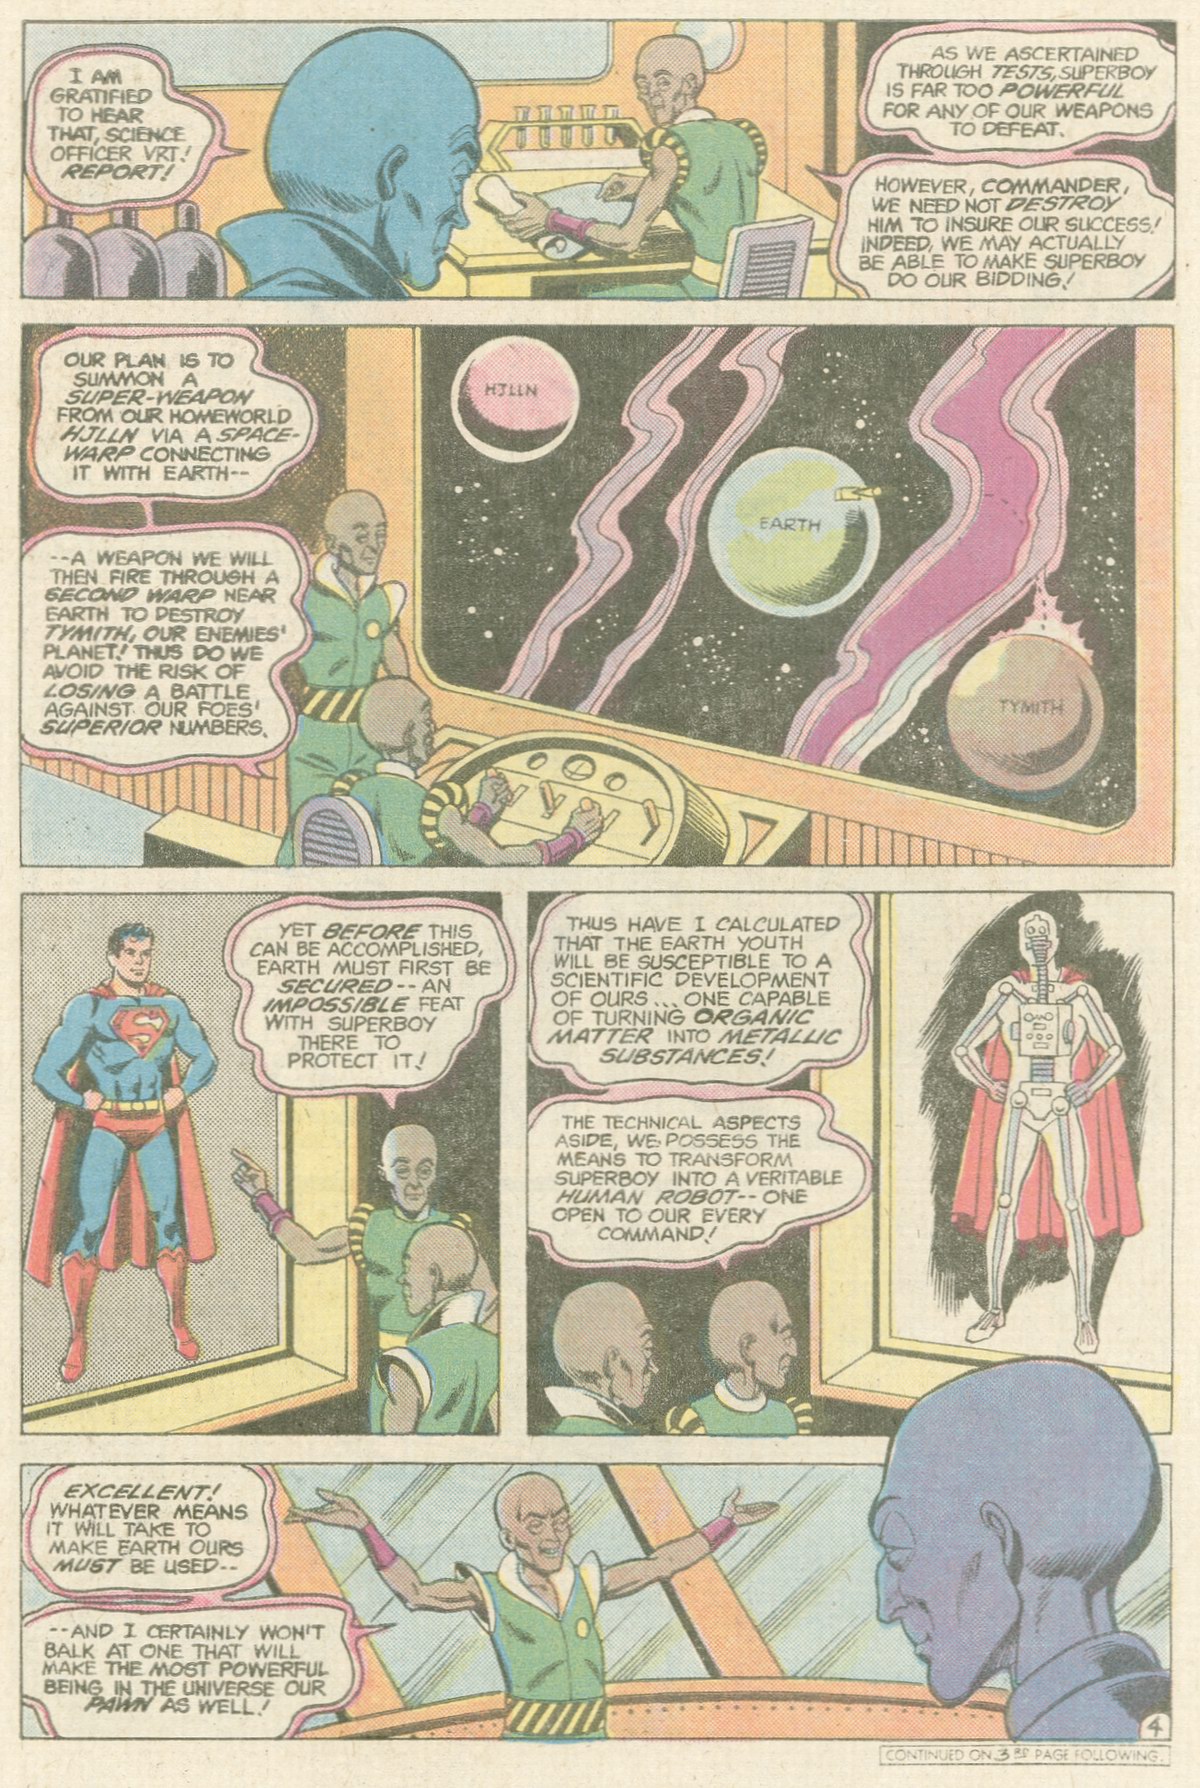 The New Adventures of Superboy 41 Page 4